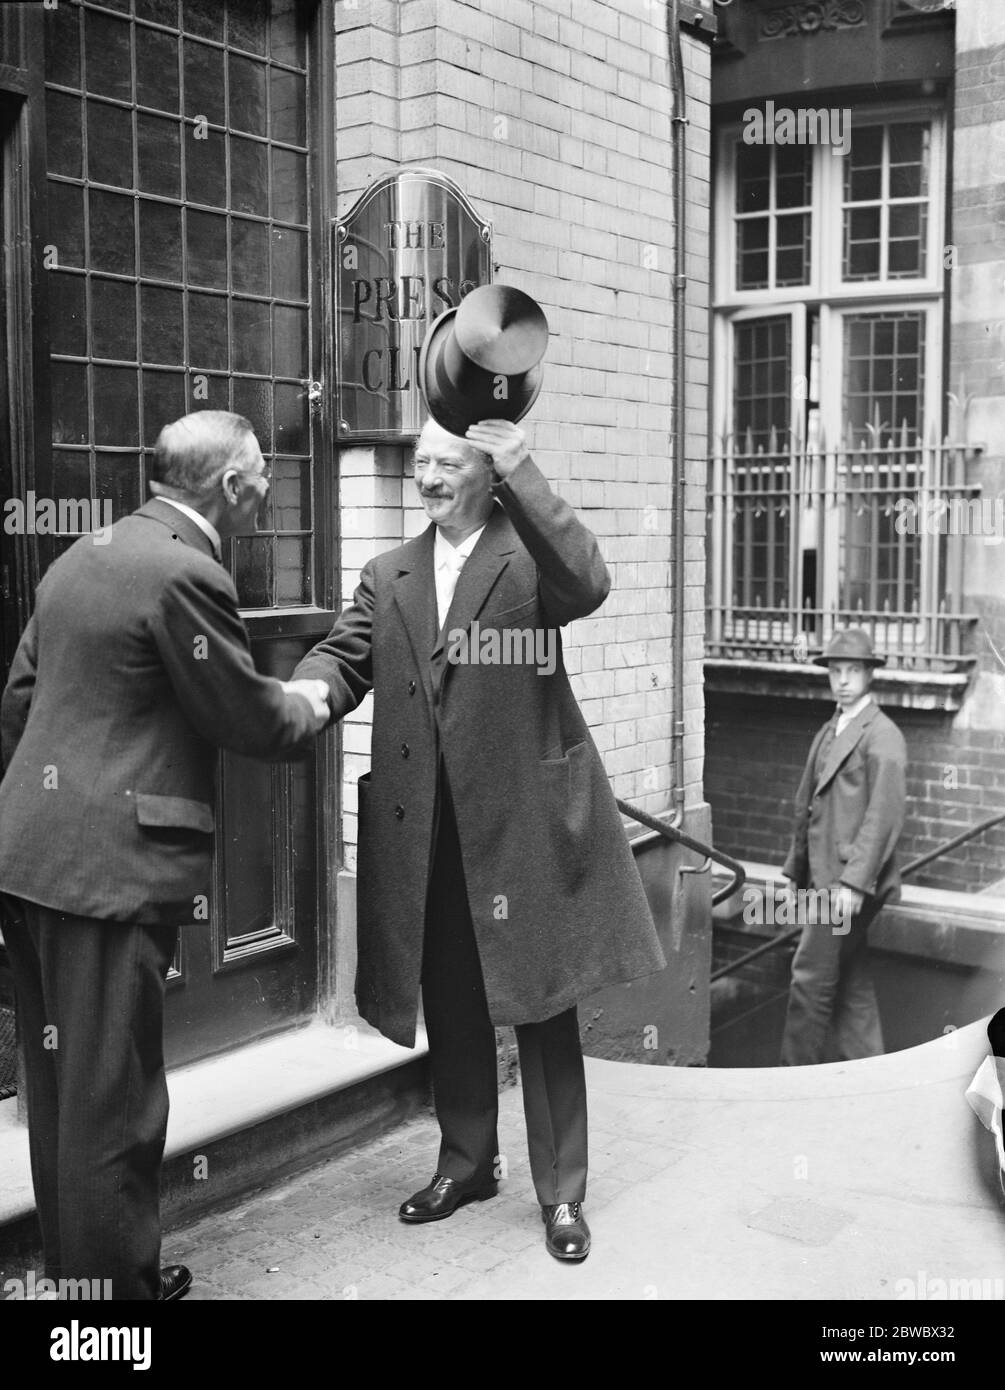 Paderewski at the Press Club . M Paderewski , the famous pianist , was the guest of honour at a London Press Club luncheon on monday . M Paderewski arriving . 13 July 1925 Stock Photo